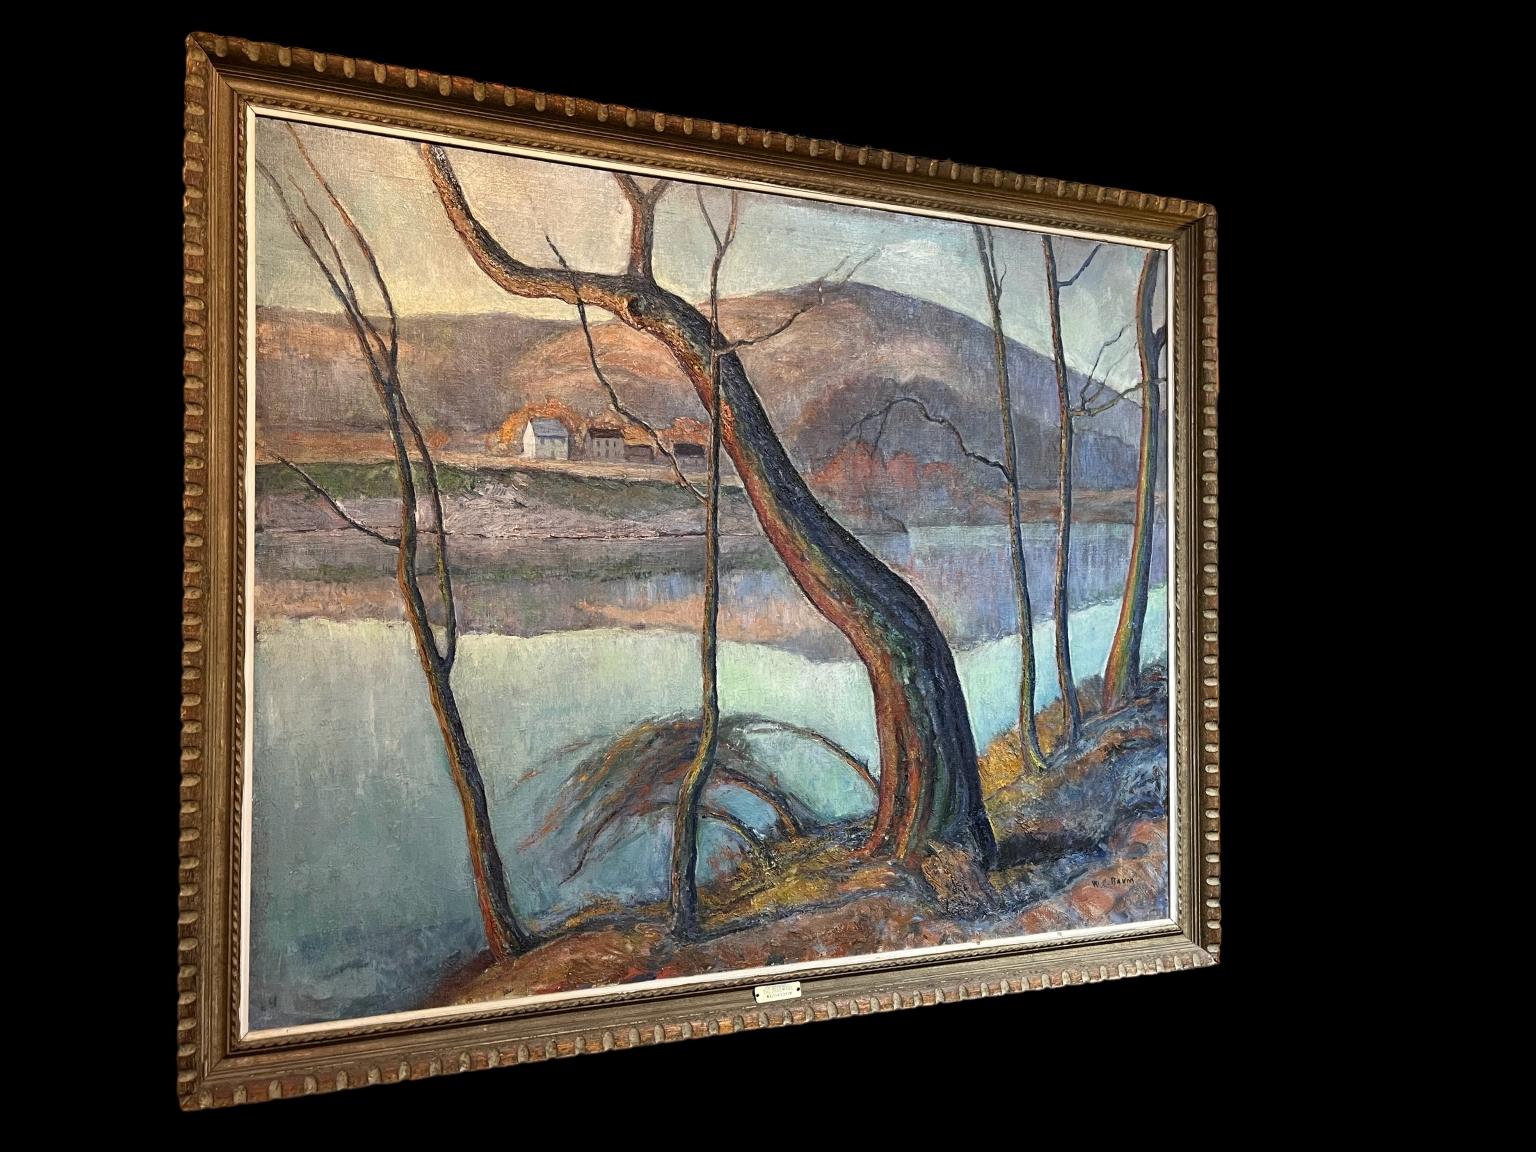 Beautiful Walter E Baum painting from the 1930’s-40’s titled The Delaware in its original frame. The painting came out of a private collection, has never been on the market. Canvas dimensions 50 inches wide by 40 inches high. Frame Dimensions 55